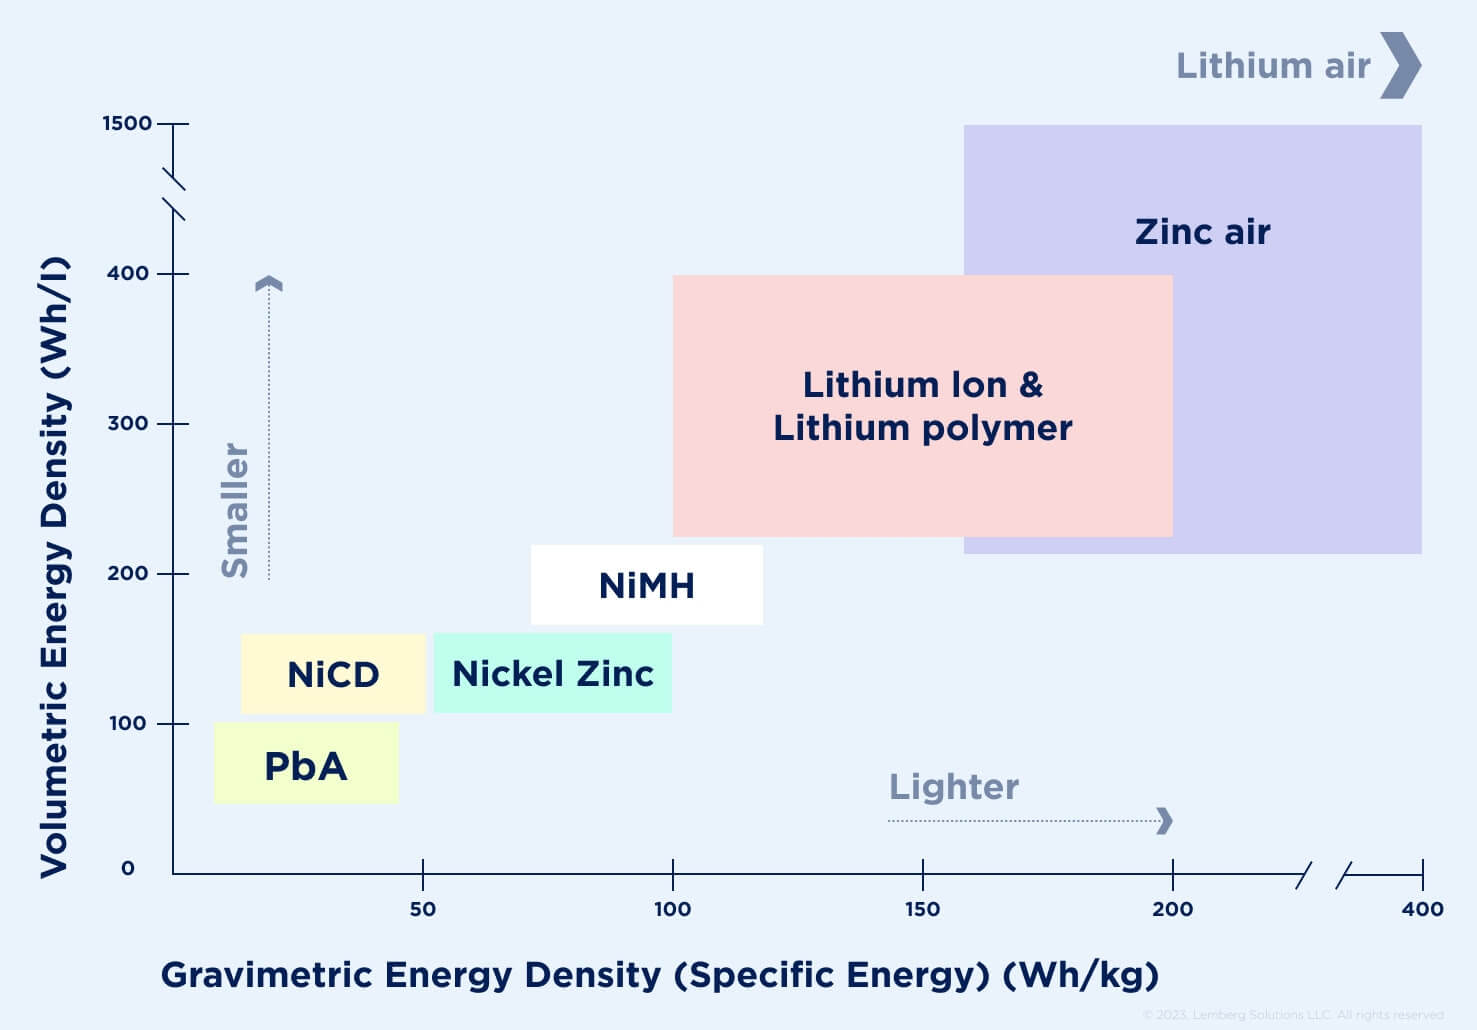 Sodium-ion Battery Is Shaping Up To Be A Viable Alternative To Lithium-ion  Battery In EVs